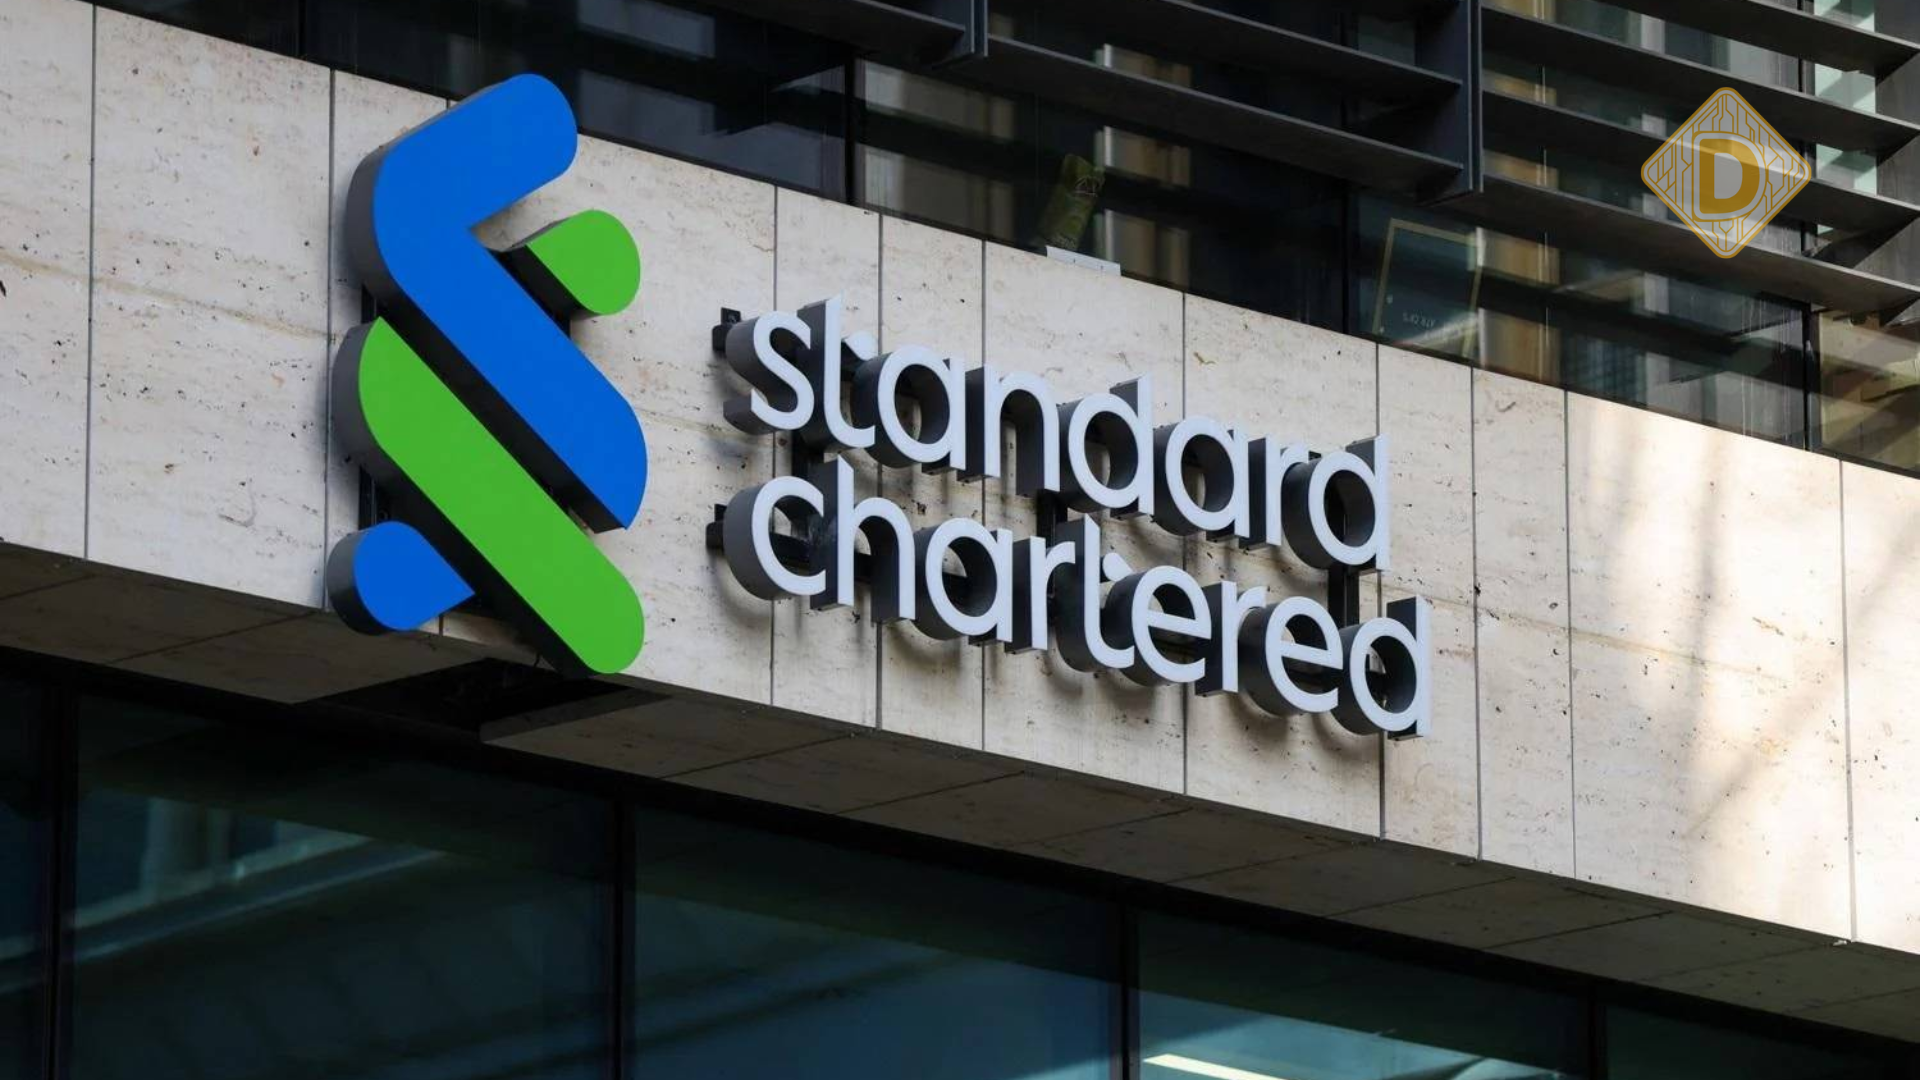 Bitcoin (BTC) falling to $50,000 ? Standard Chartered Bank issues a warning